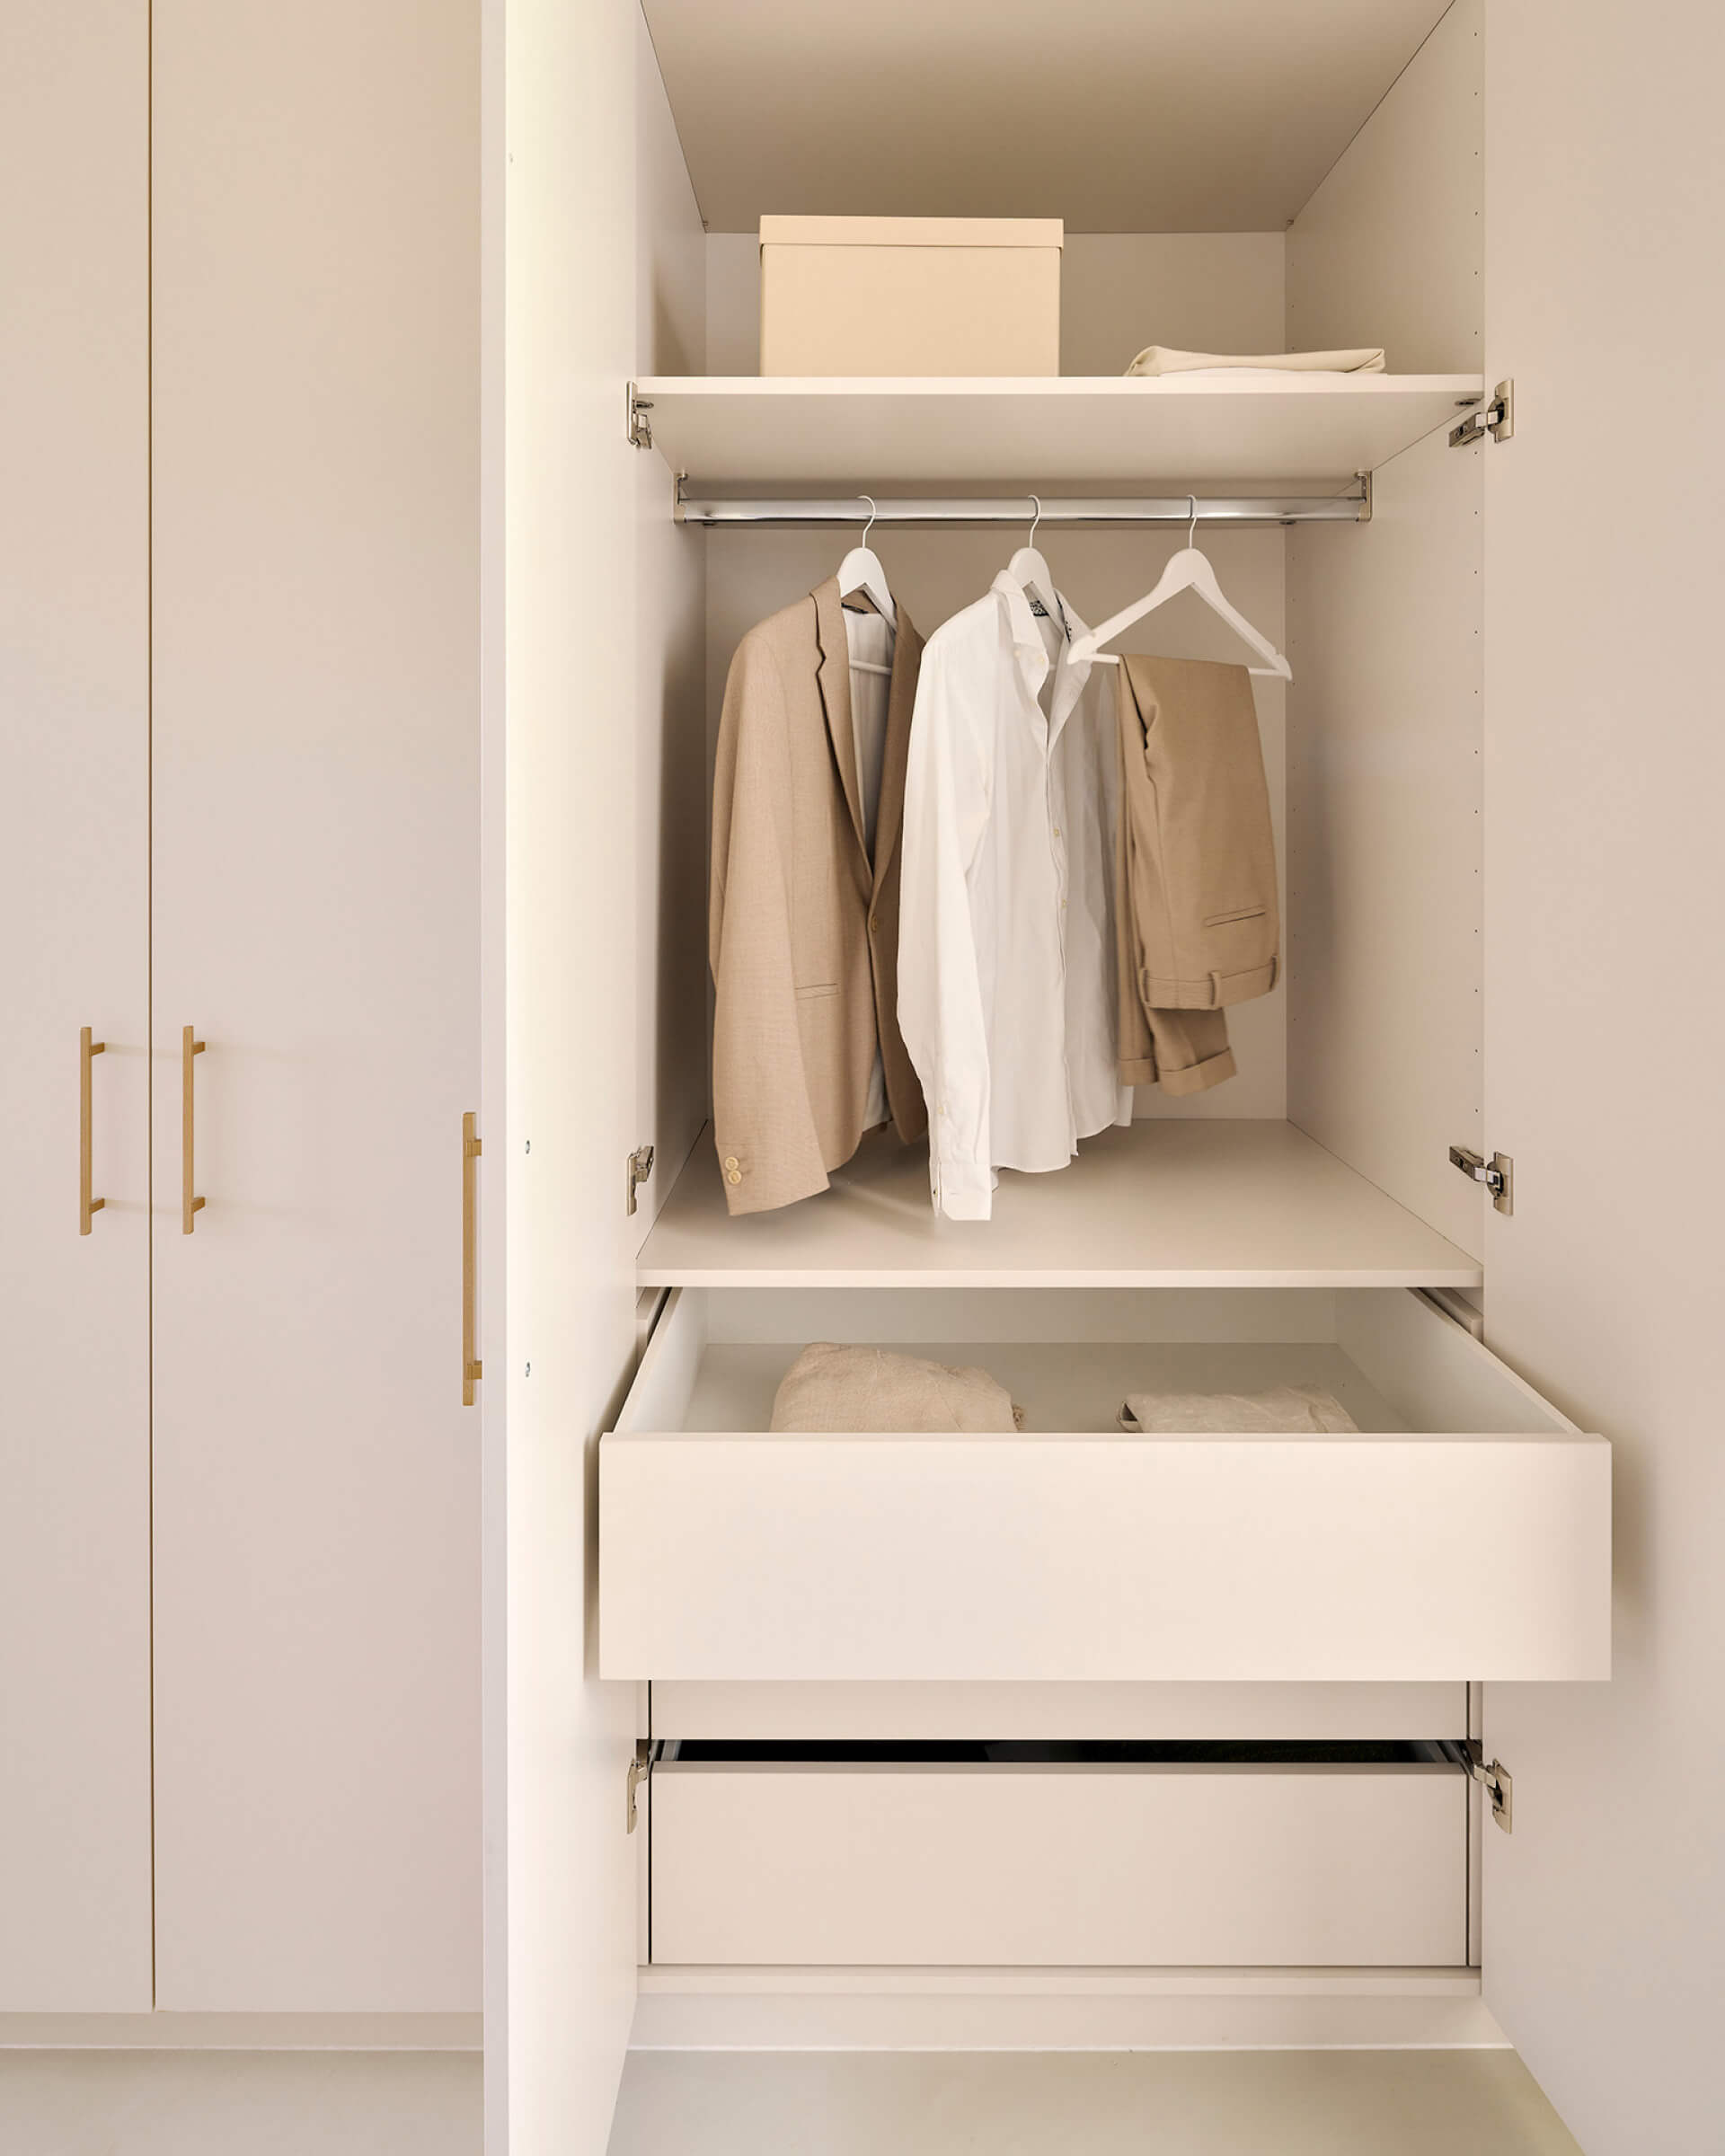 Layout of custom wardrobe with drawers